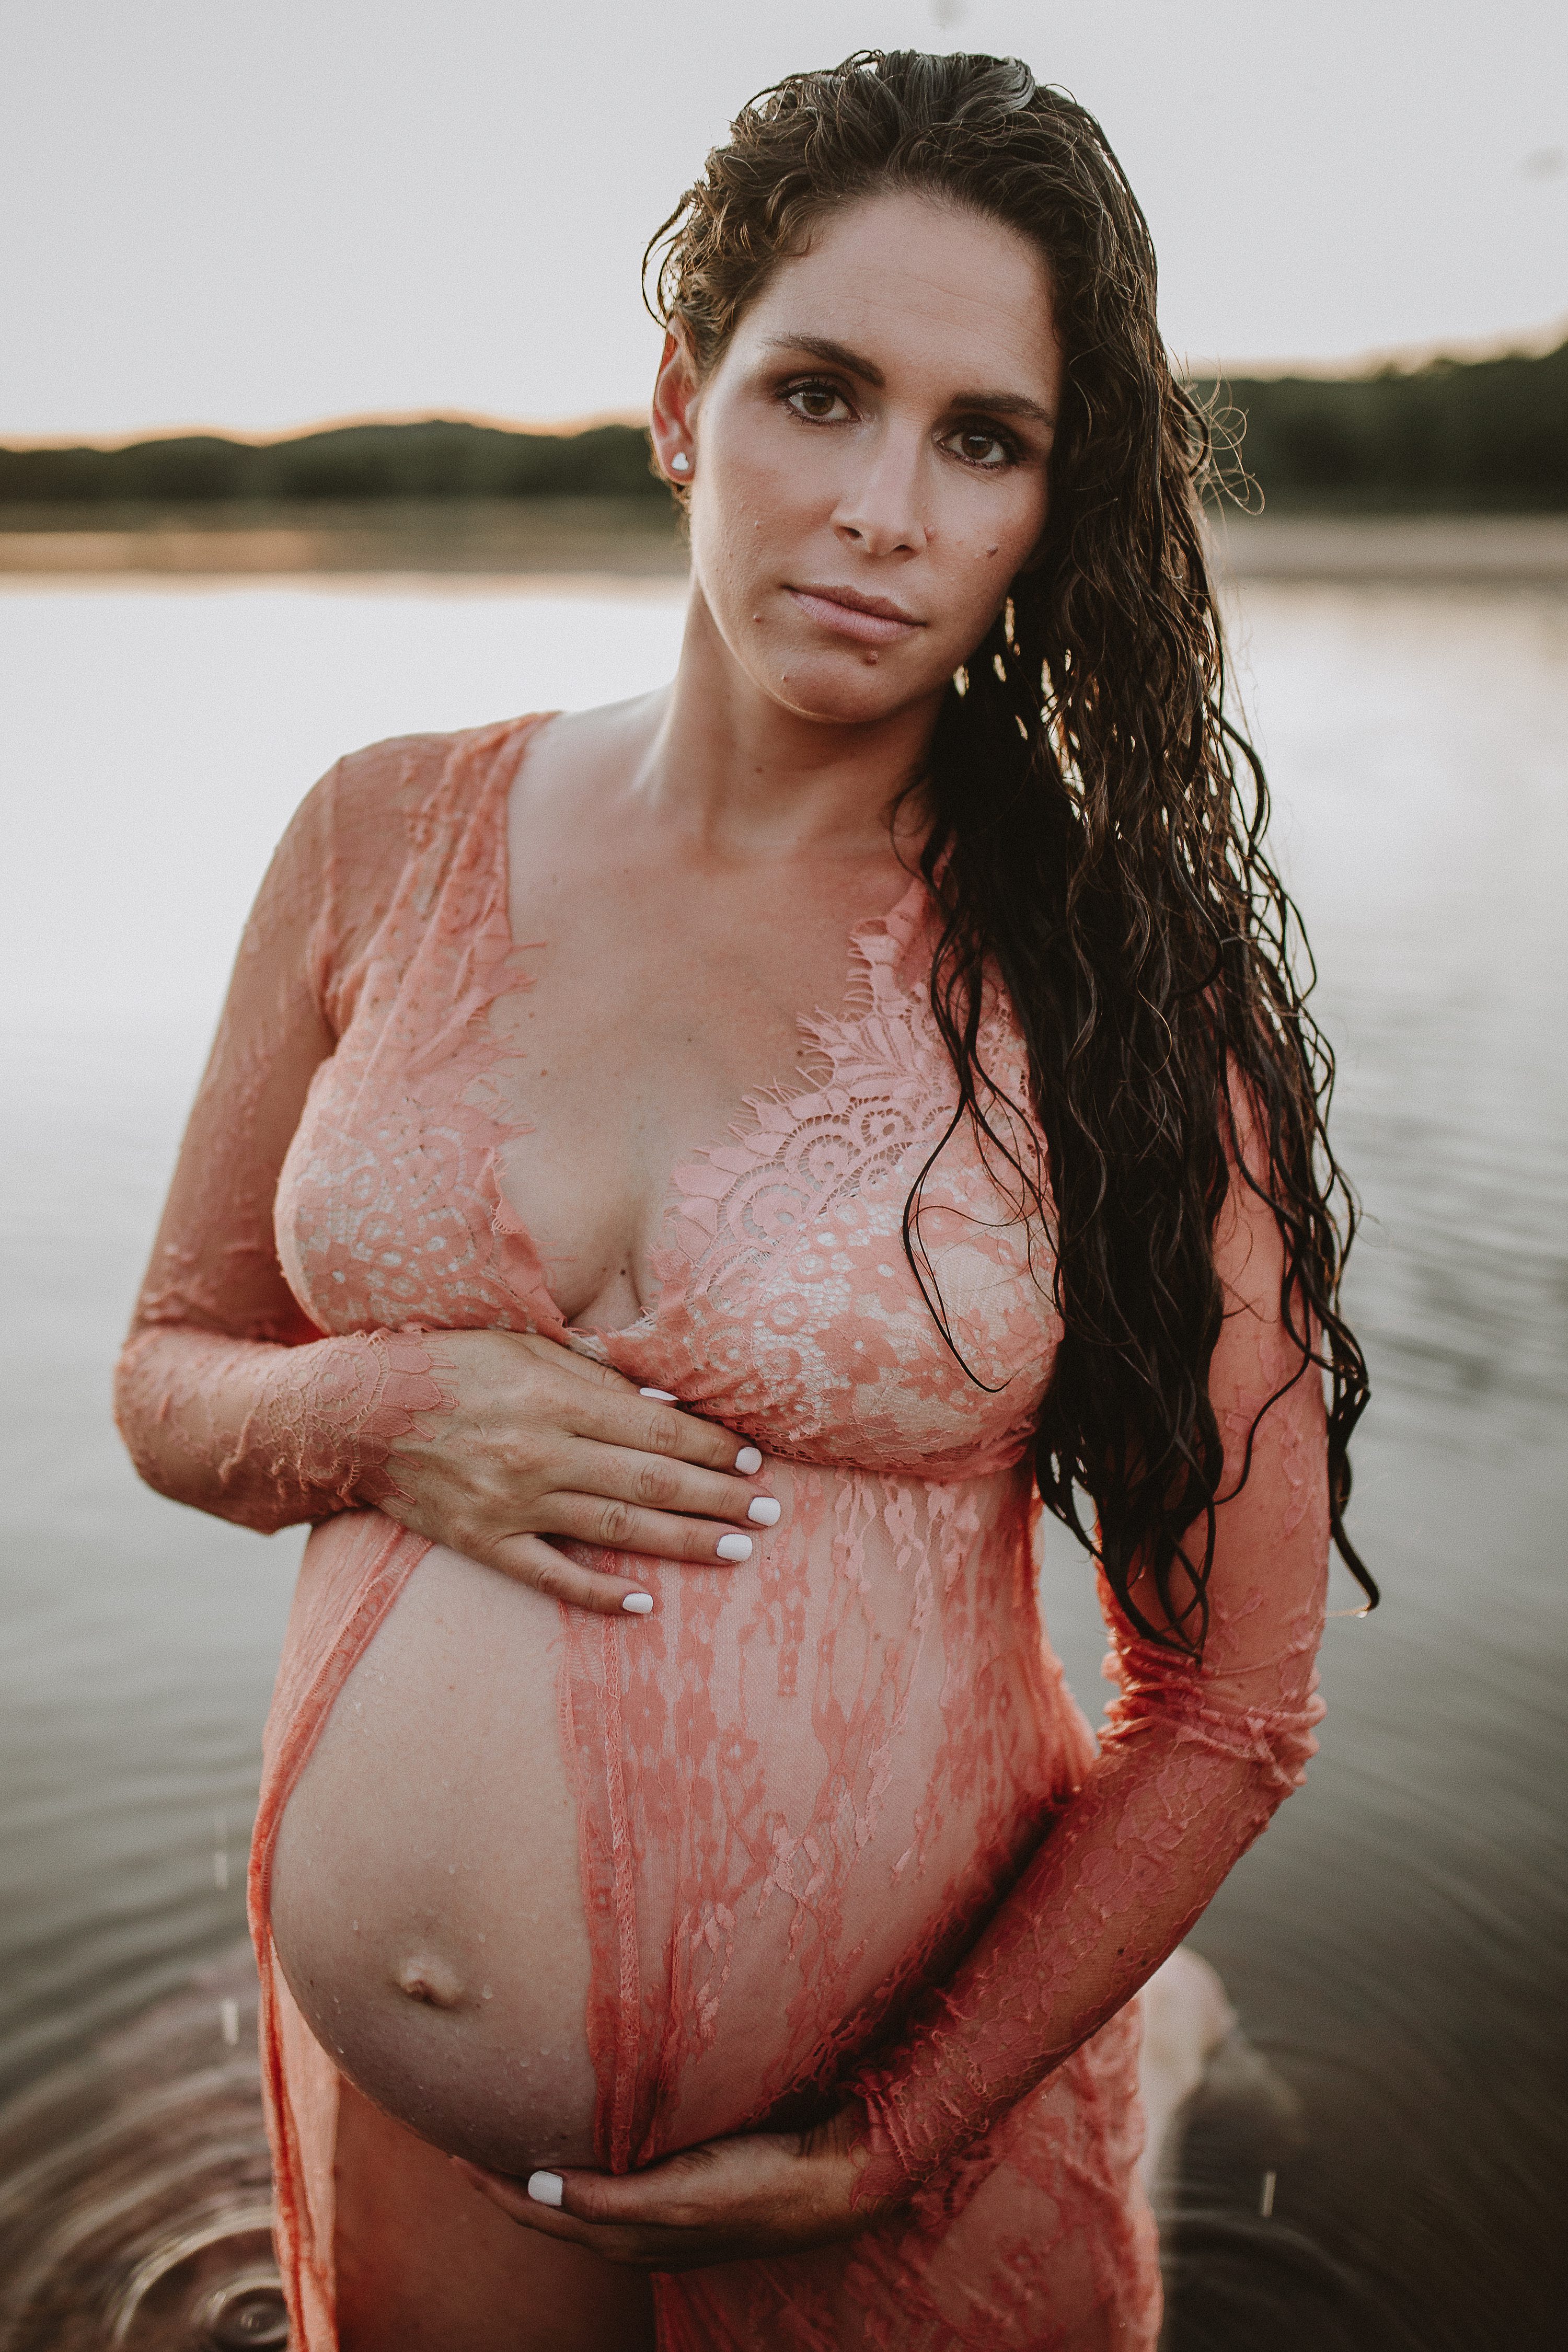 Maternity session by the river,Pregnant mother in a lace gown by the beach,PPregnant mother in a peach, lace gown by the water.,Pregnant mother in a long, lace gown holding her belly.,Pregnant woman in a peach gown near the river at sunset.